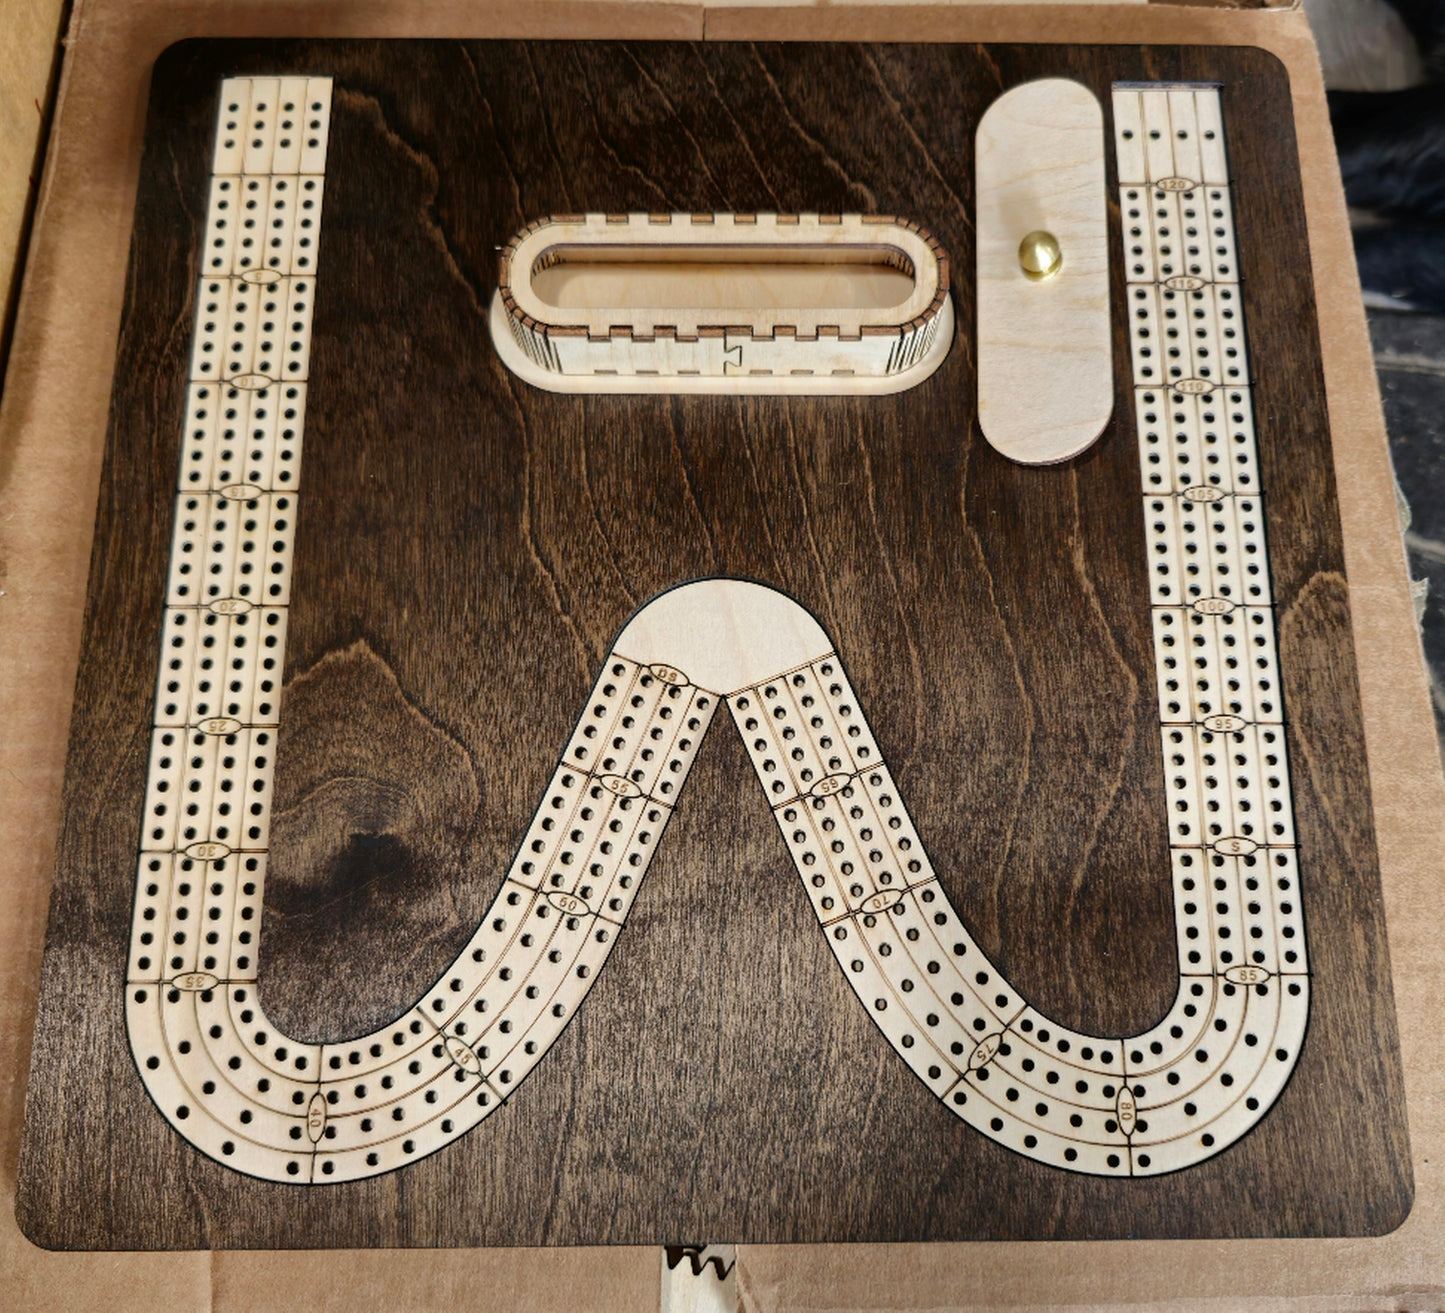 Letter W Cribbage Board with Removable Peg Storage